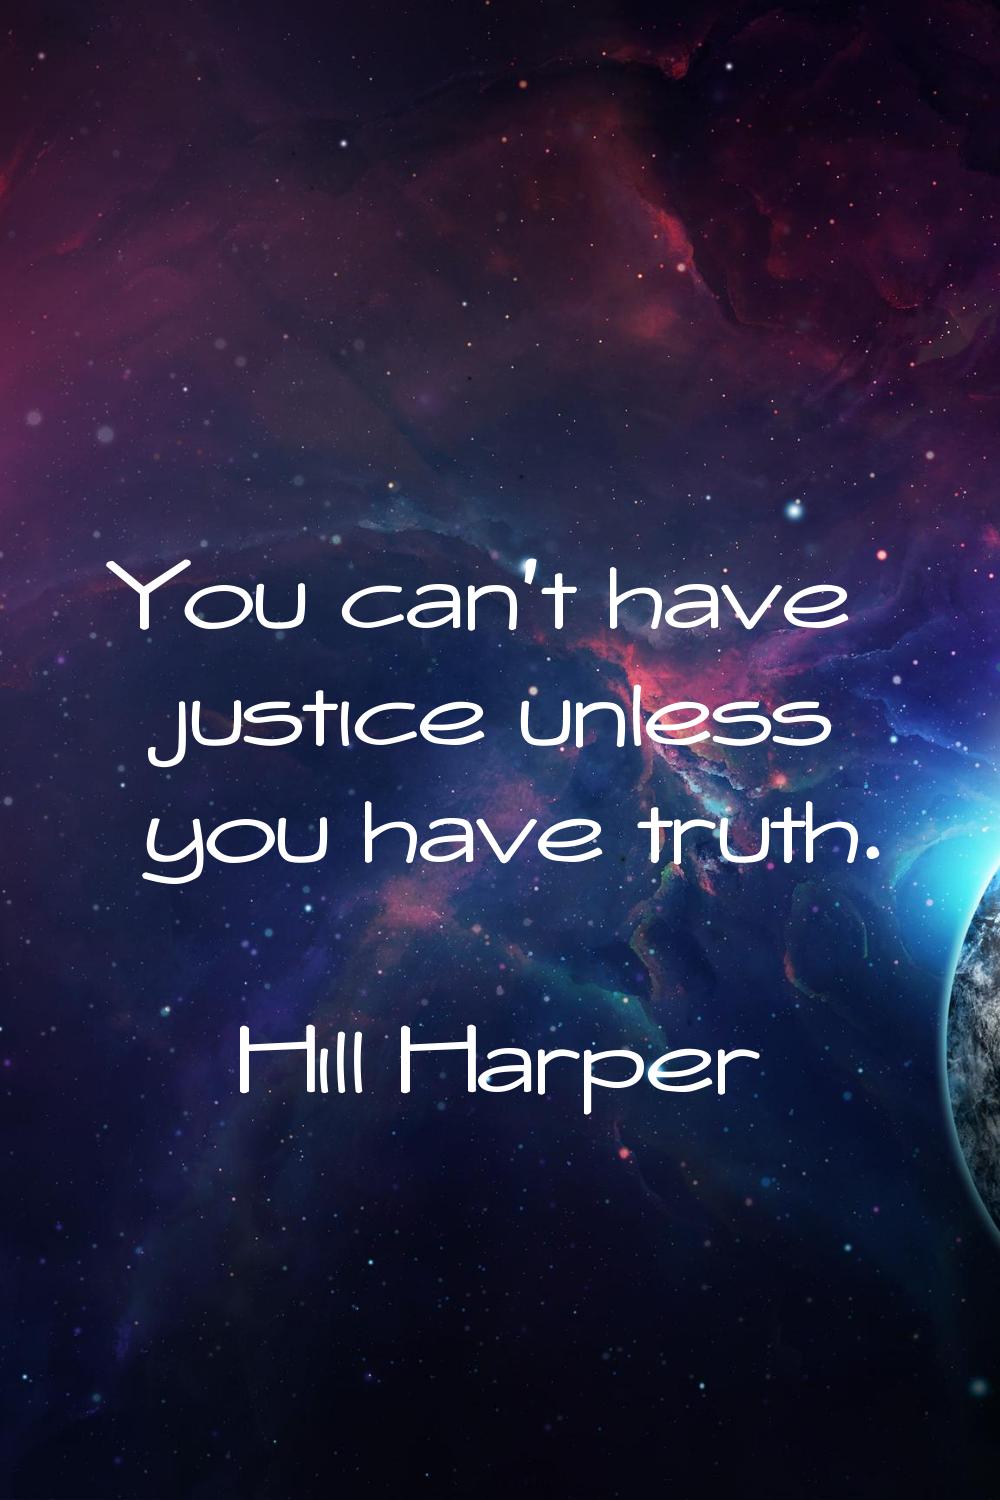 You can't have justice unless you have truth.